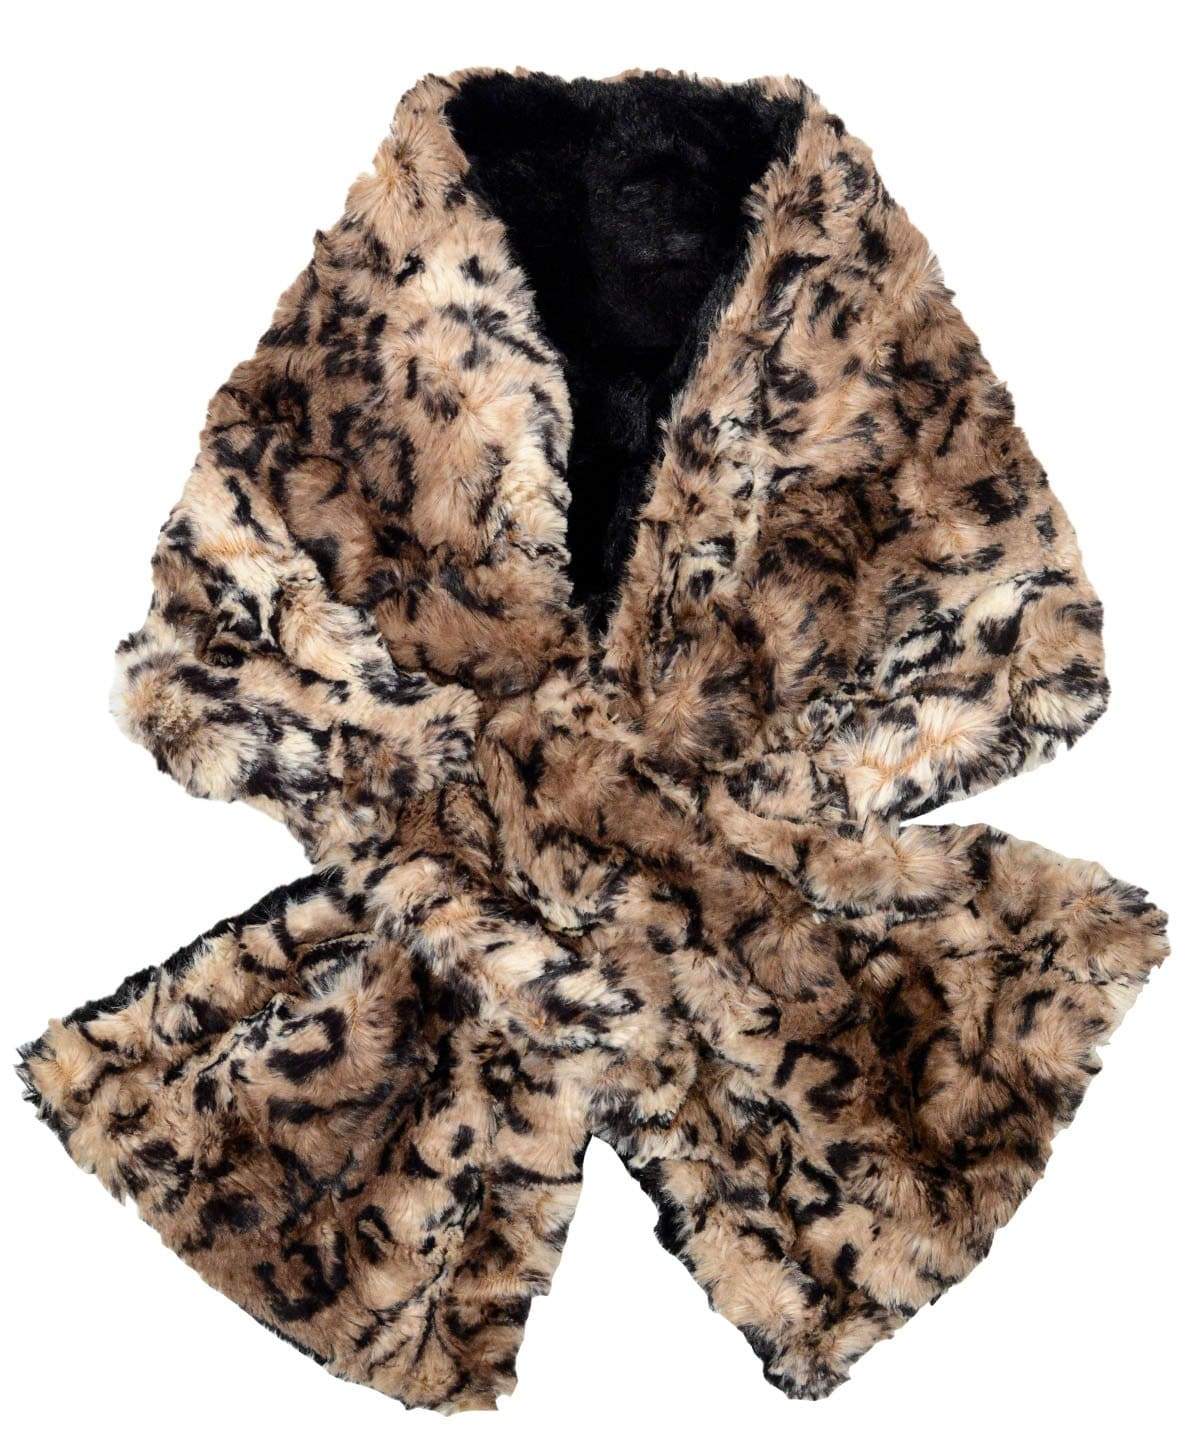 Product shot of Women’s reversible Pull Through Scarf | Carpathian Lynx animal print faux fur in browns and creams with cuddly fur in black | Handmade in Seattle WA | Pandemonium Millinery